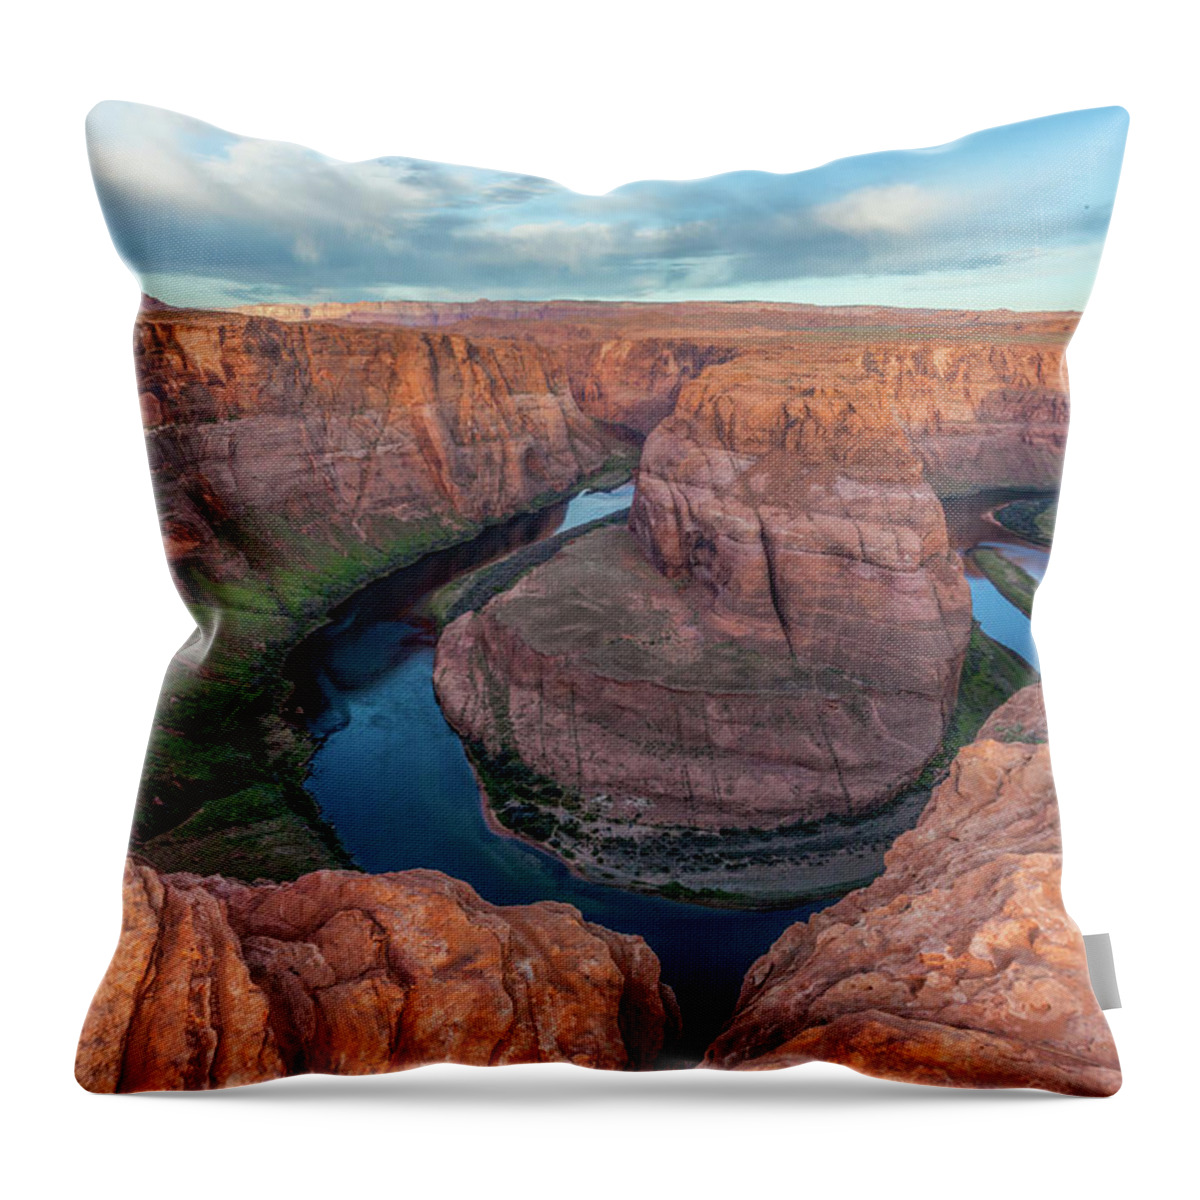 Horseshoe Bend Throw Pillow featuring the photograph Horseshoe Bend Morning Splendor by Lon Dittrick